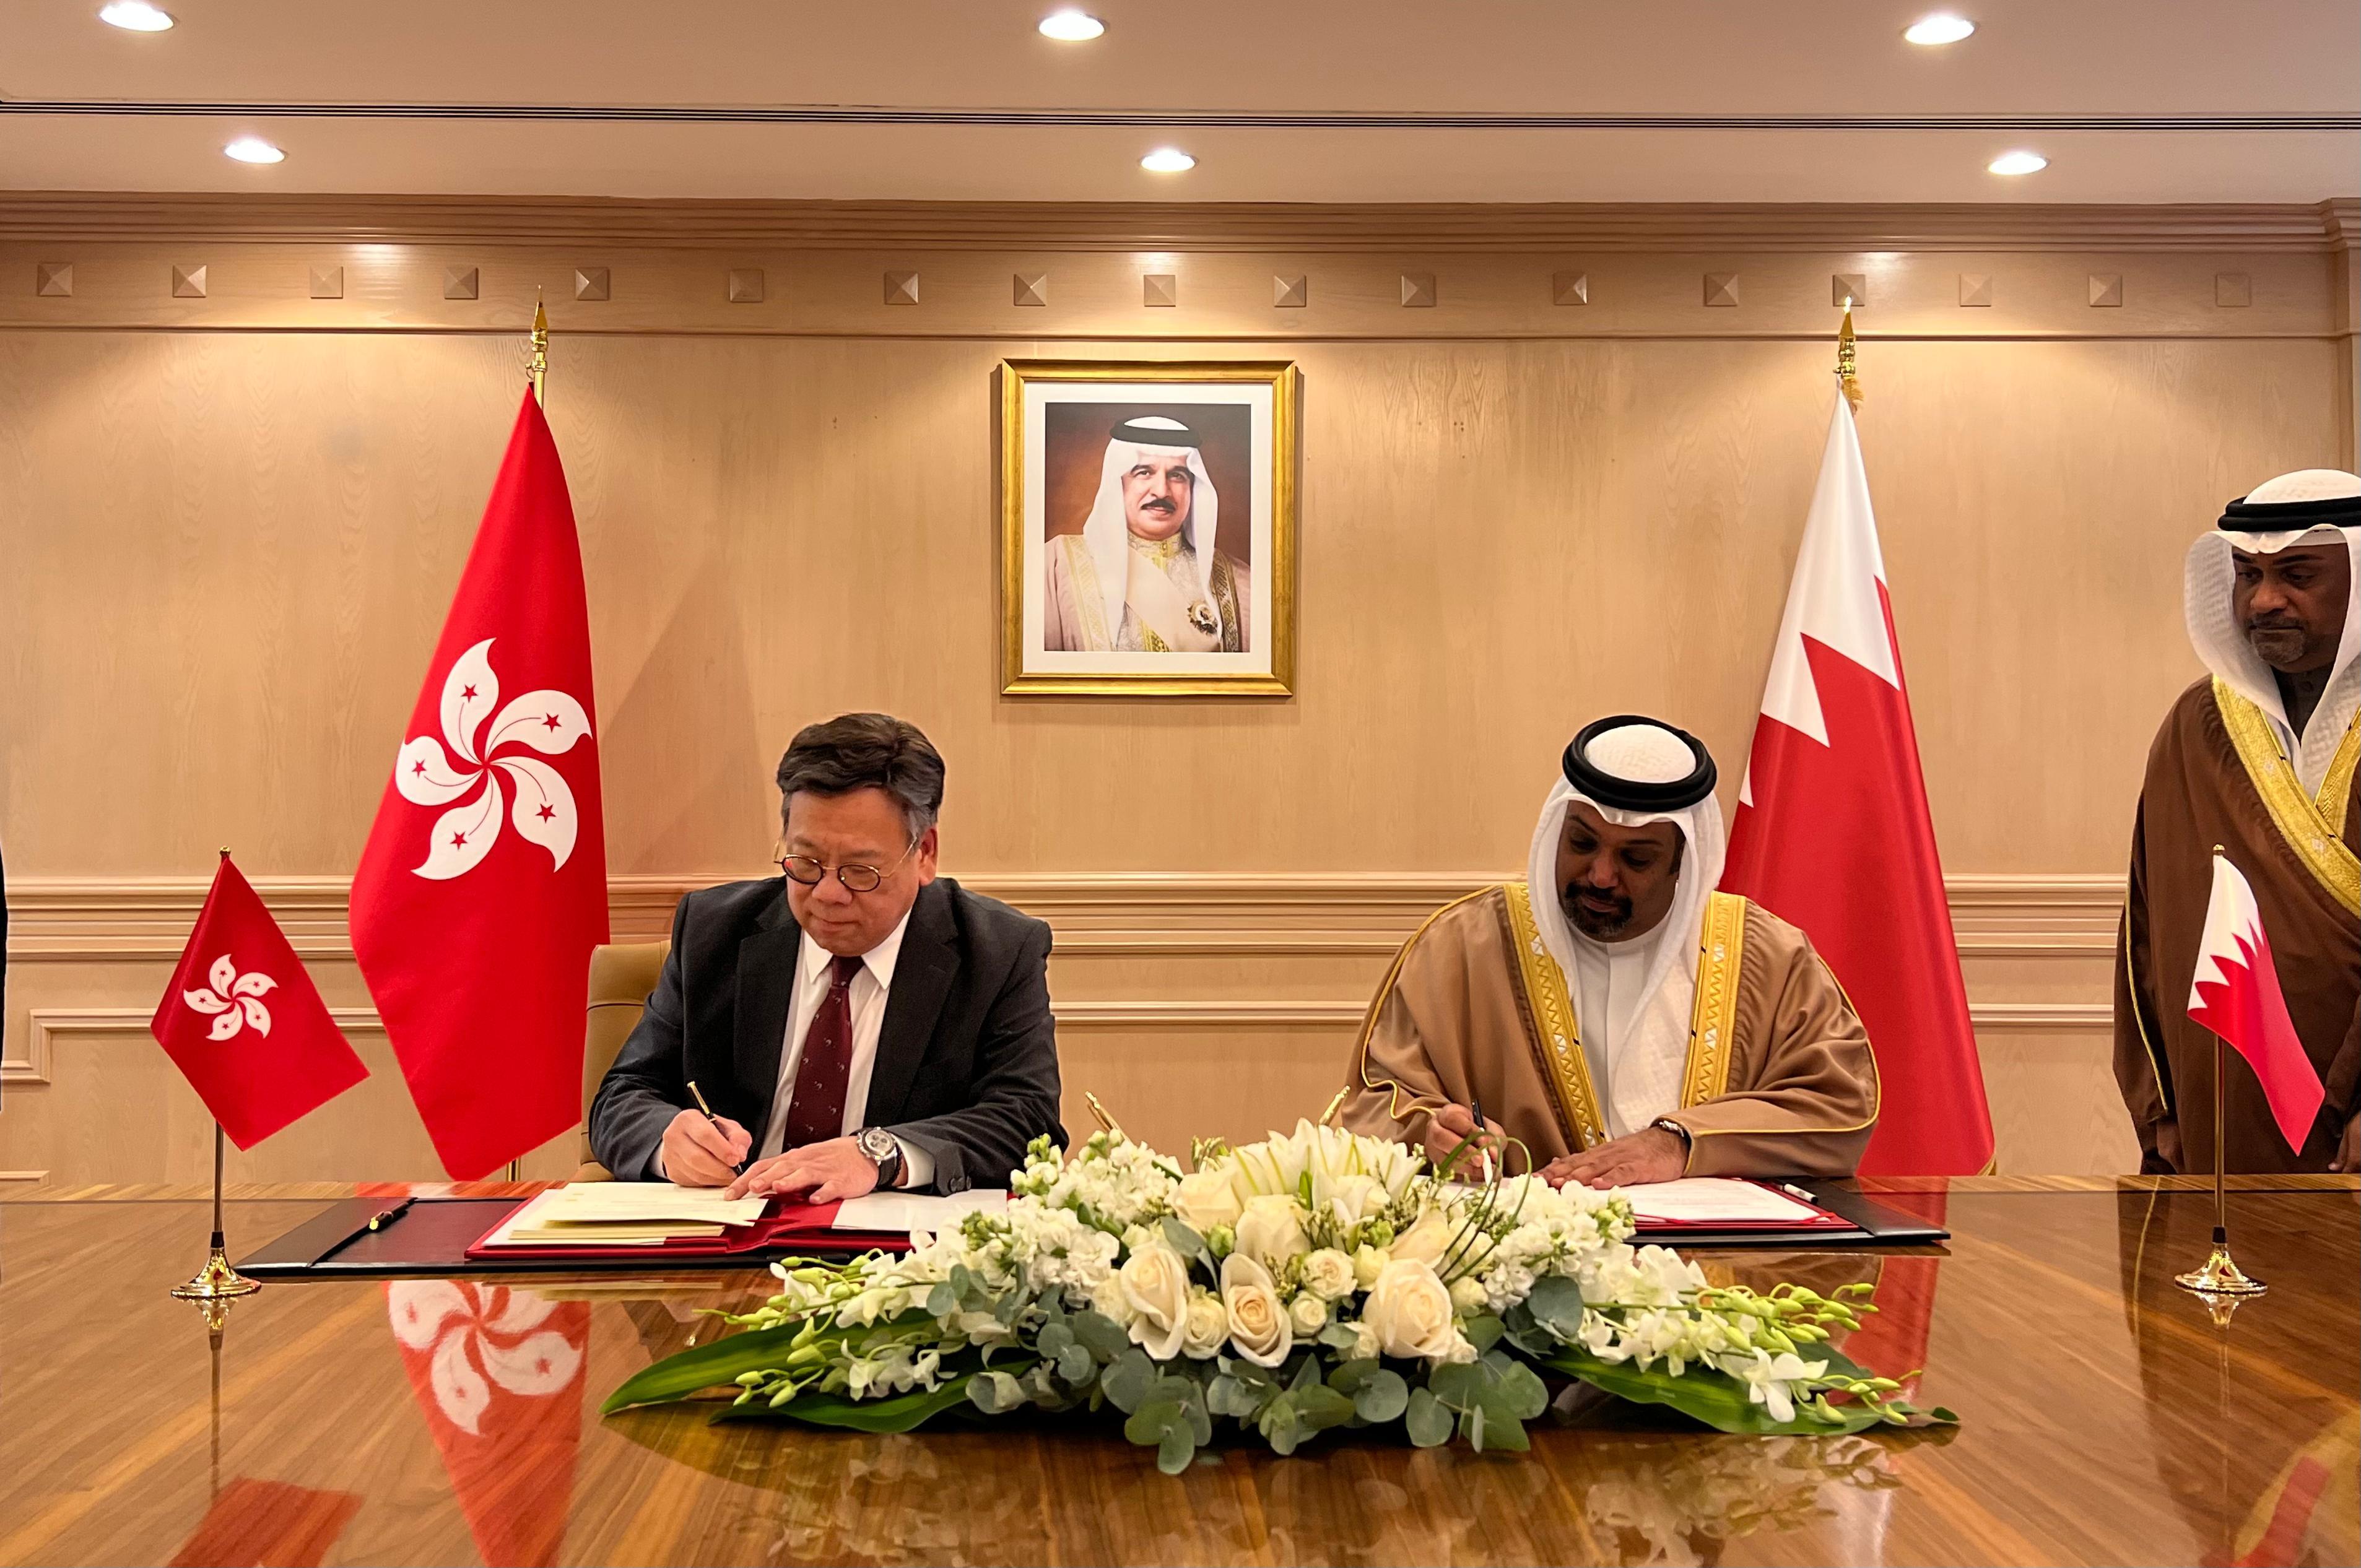 The Secretary for Commerce and Economic Development, Mr Algernon Yau (first left), and the Minister of Finance and National Economy of Bahrain, Shaikh Salman bin Khalifa Al Khalifa (second left), sign the Hong Kong-Bahrain Investment Promotion and Protection Agreement in Manama, Bahrain today (March 3, Manama time).
